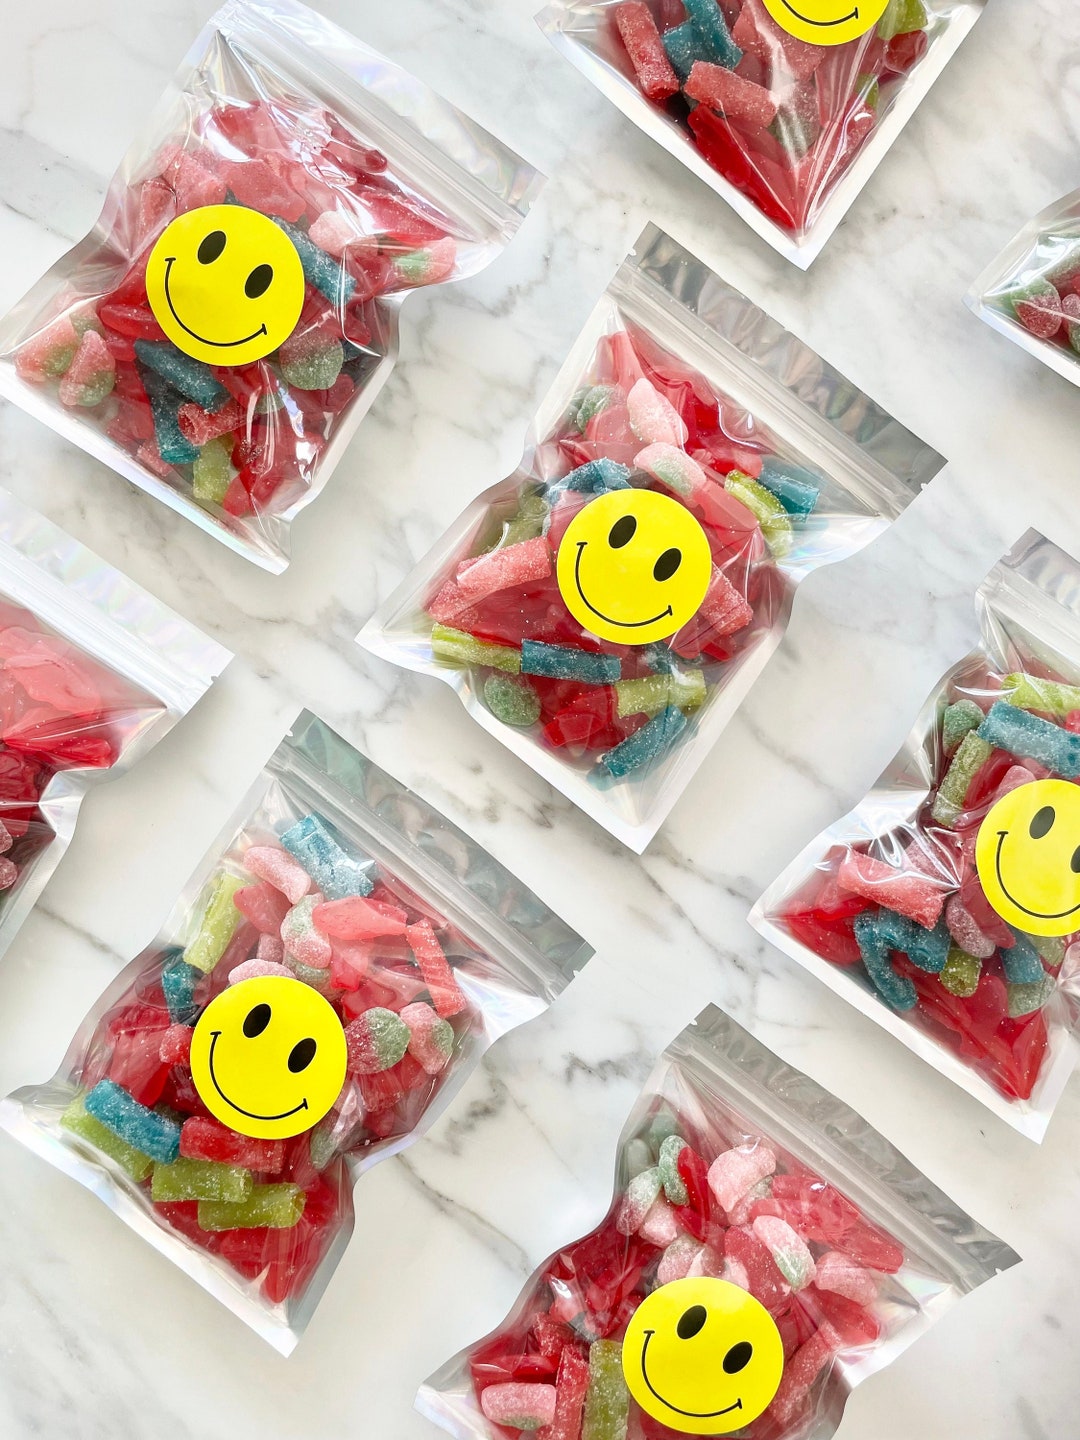 500 Pk, Smiley Face Packaging Sticker, Round 2 for Gift Bags